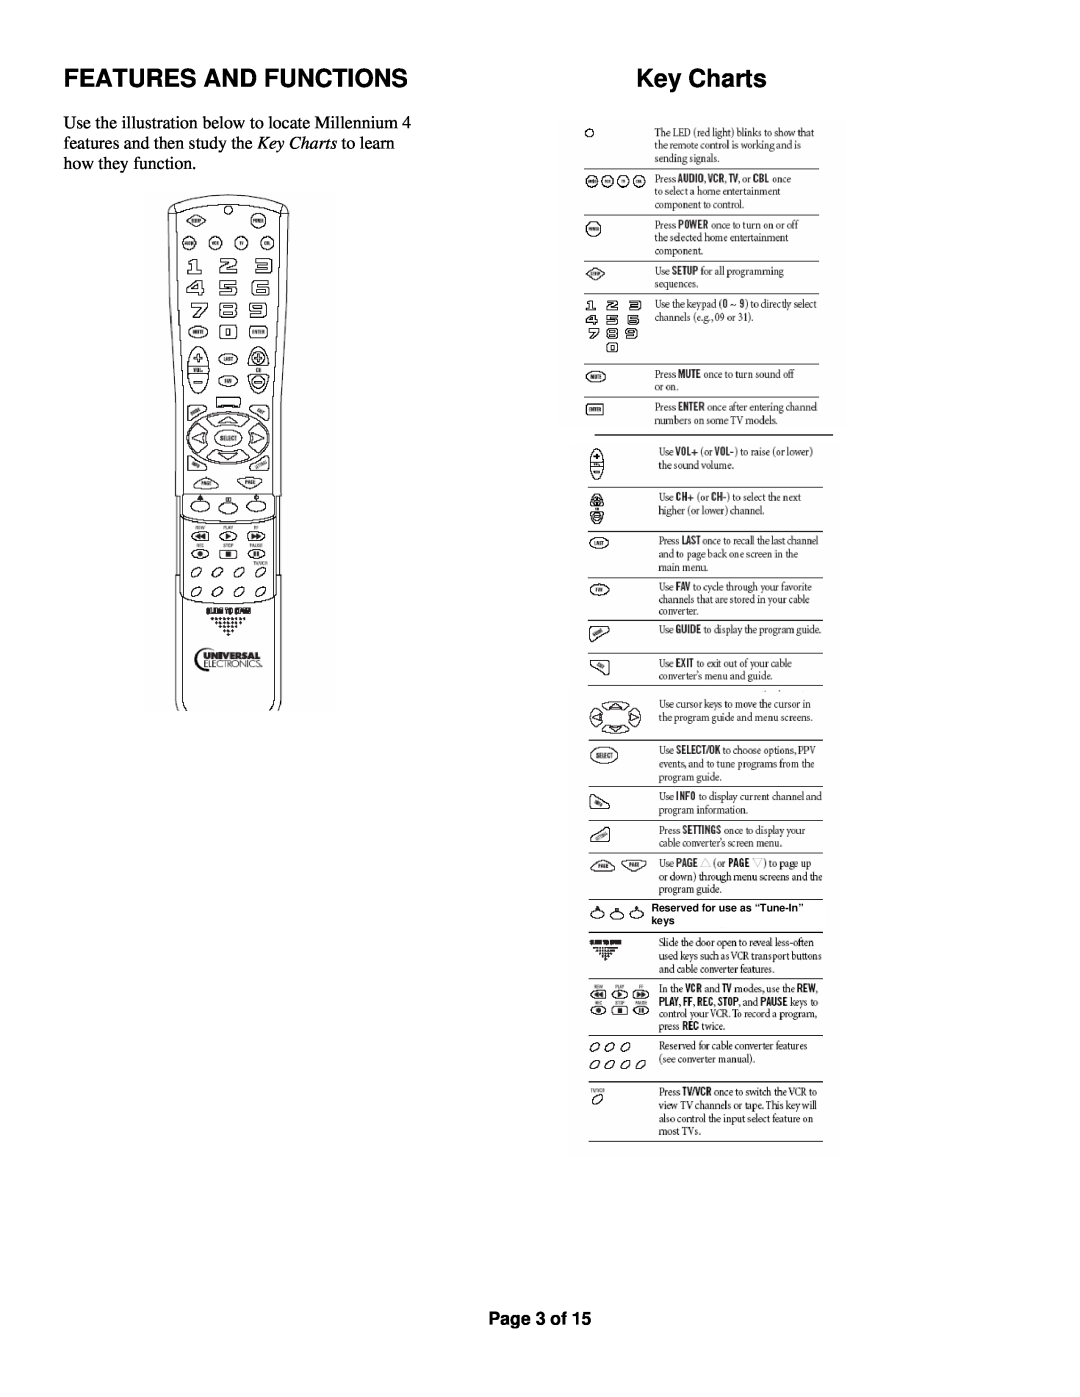 Universal Electronics Millennium 4 manual Features And Functions, Key Charts, Page 3 of, Reserved for use as “Tune-In” keys 